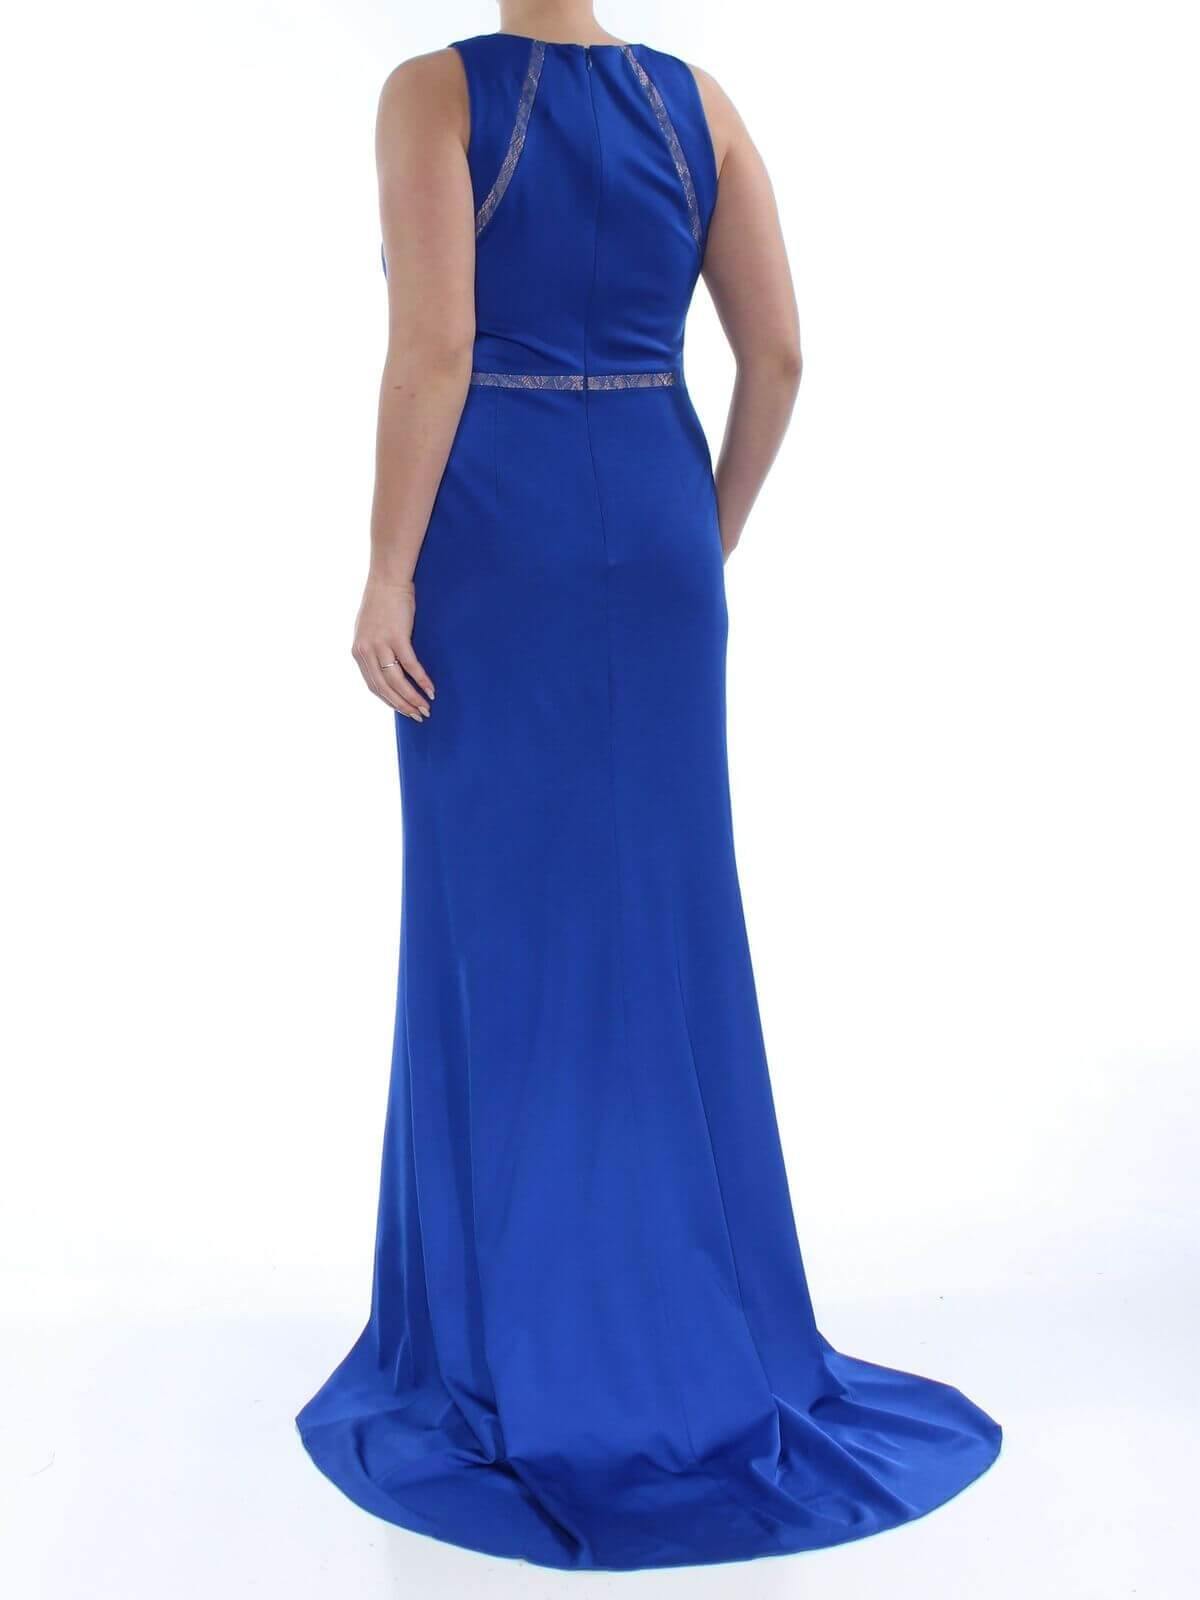 Adrianna Papell Long Formal Sleeveless Fitted Dress - The Dress Outlet Adrianna Papell